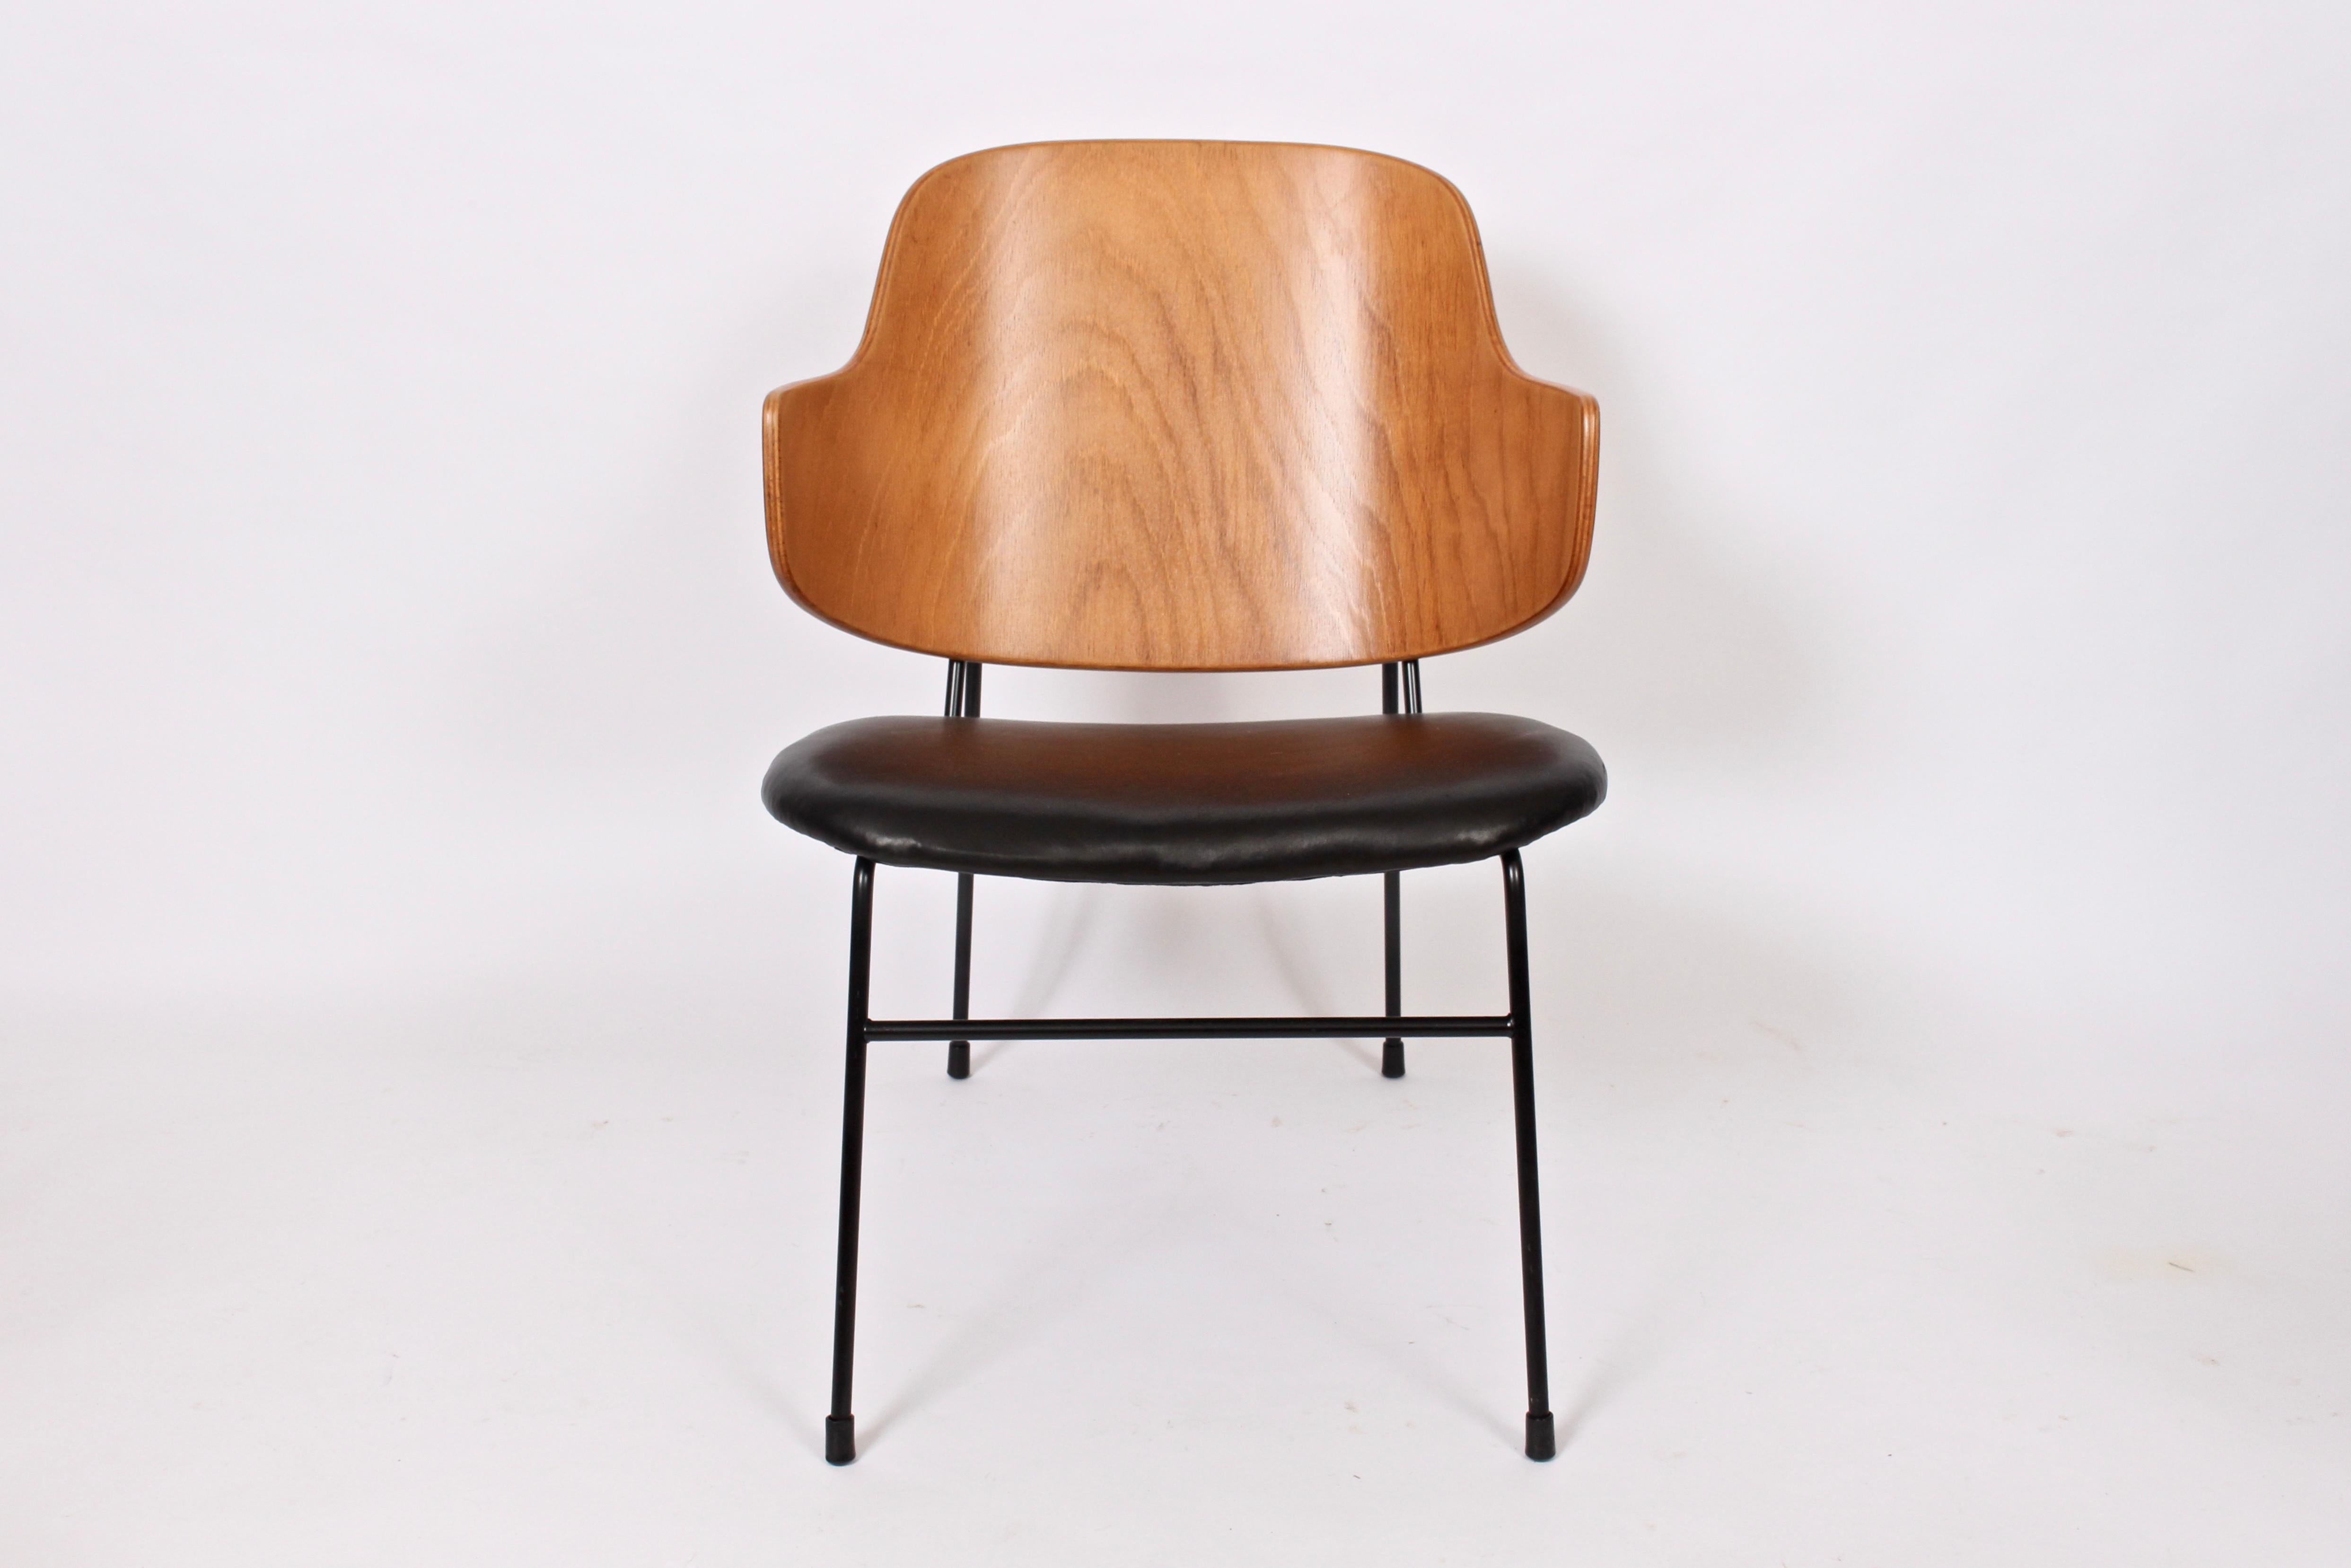 Classic Danish modern Kofod-Larsen penguin chair. Featuring a sturdy black wrought Iron framework with capped feet, slightly slanted and newly upholstered black leather seat with comfortable angled bentwood seat back. (Seat height 13